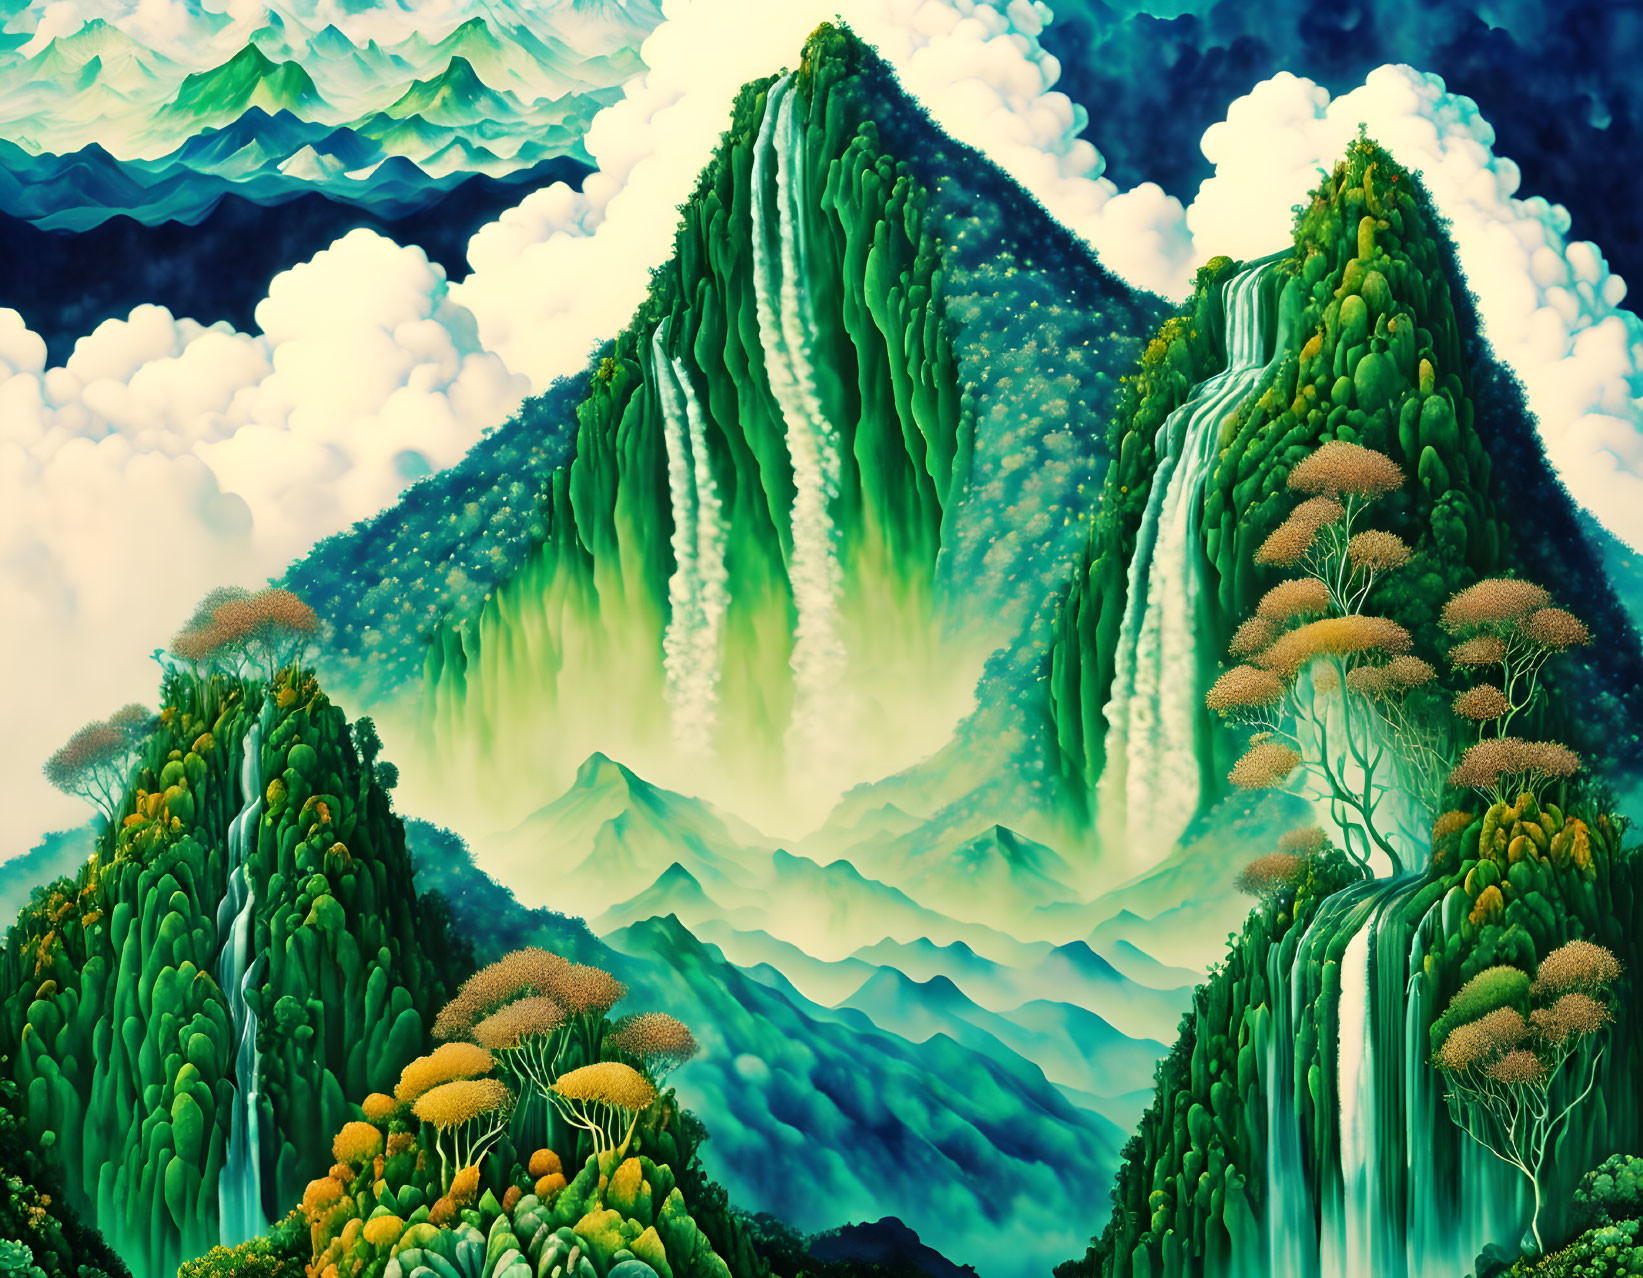 Waterfalls in the Clouds